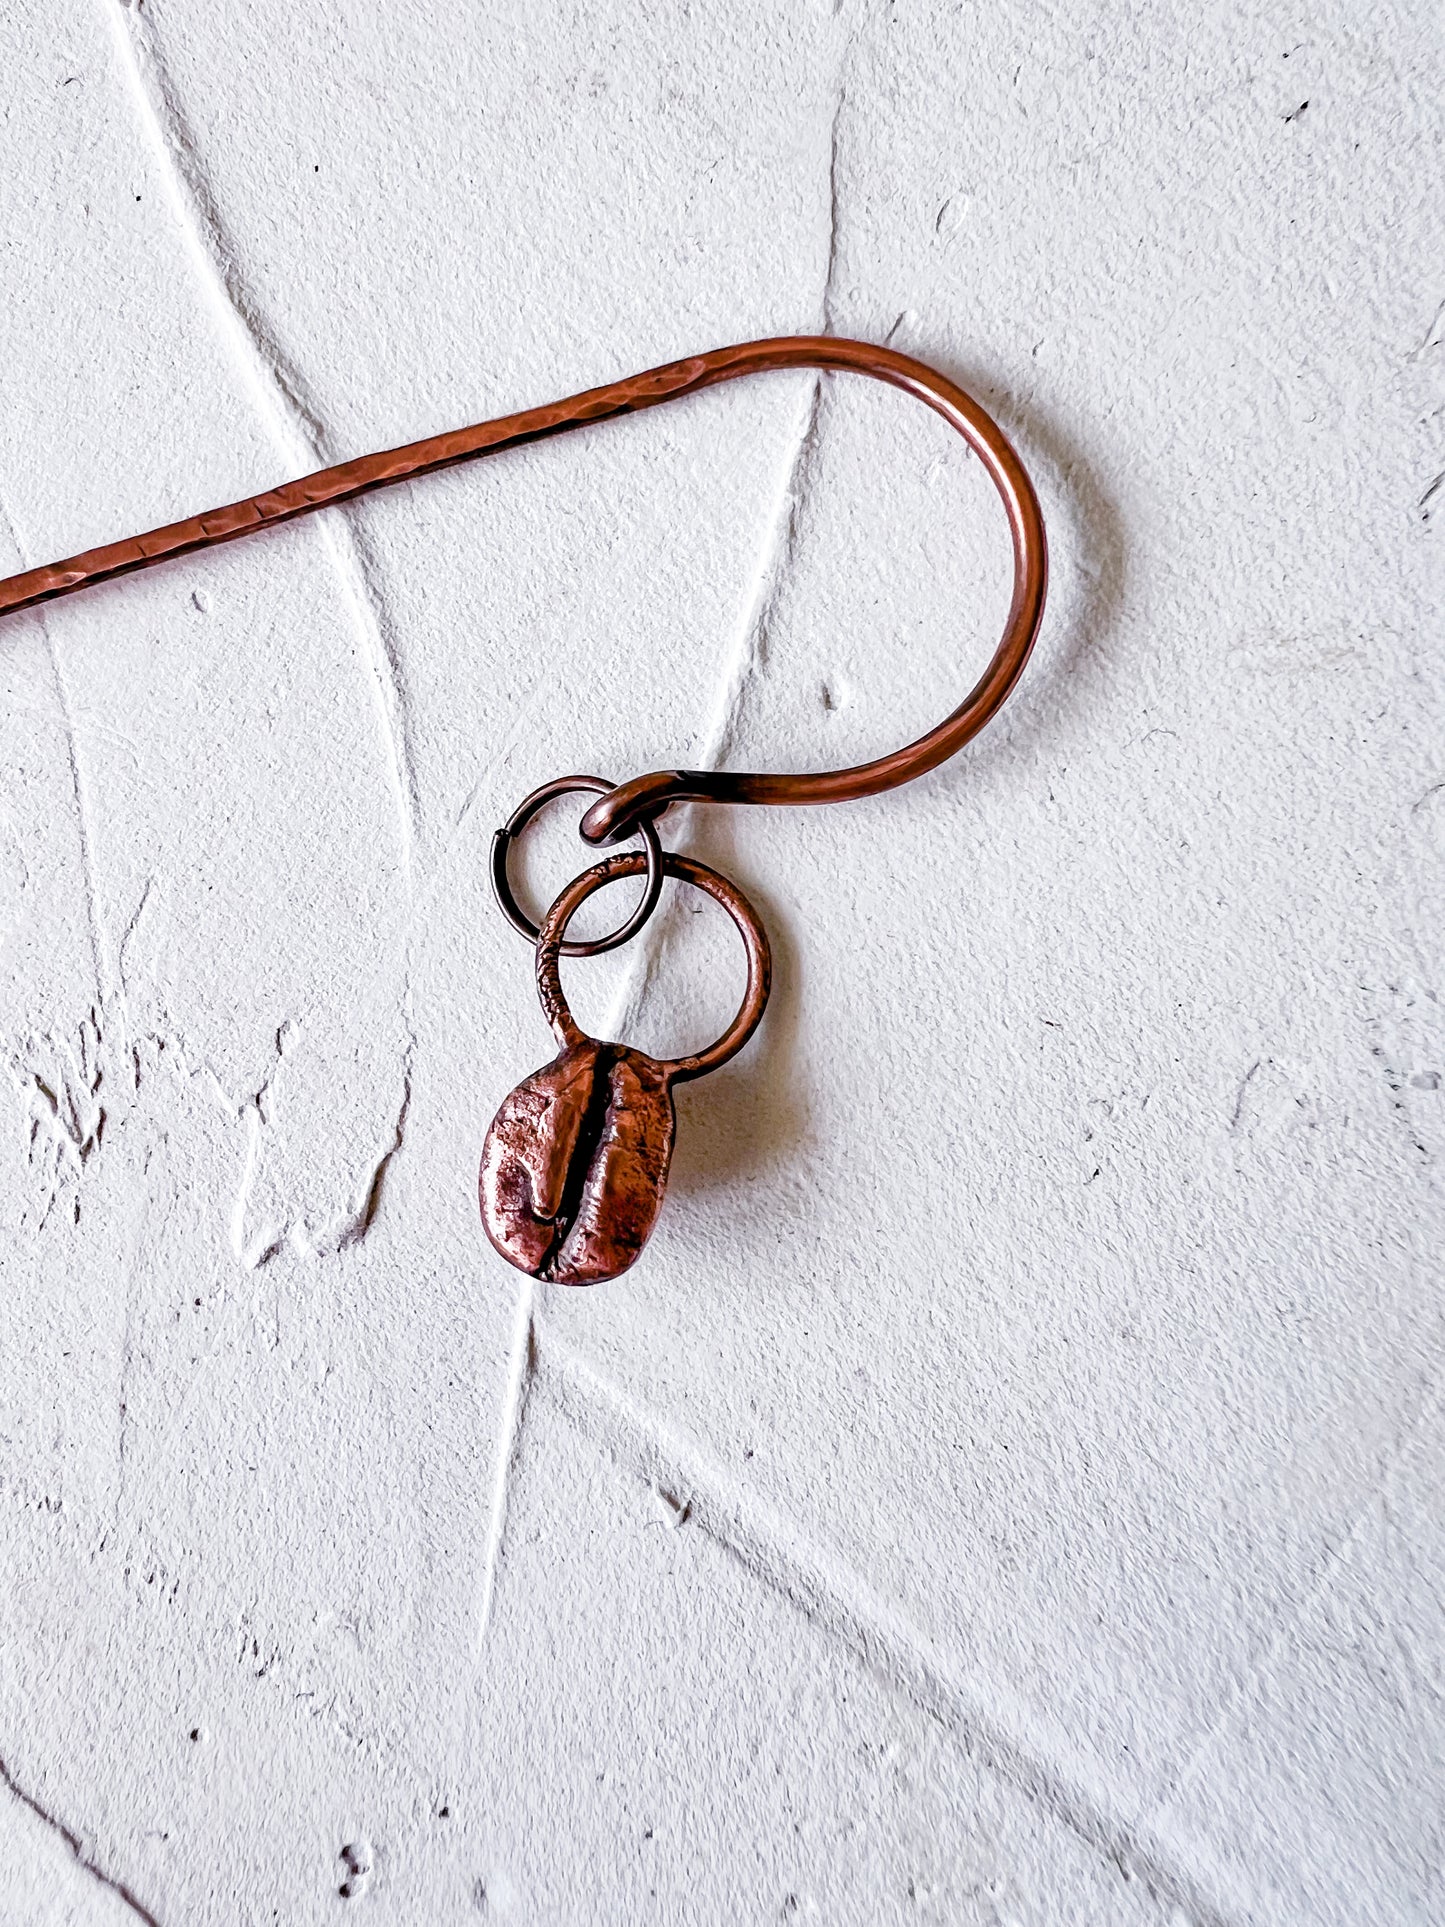 Copper Bookmark with Coffee Bean Motif